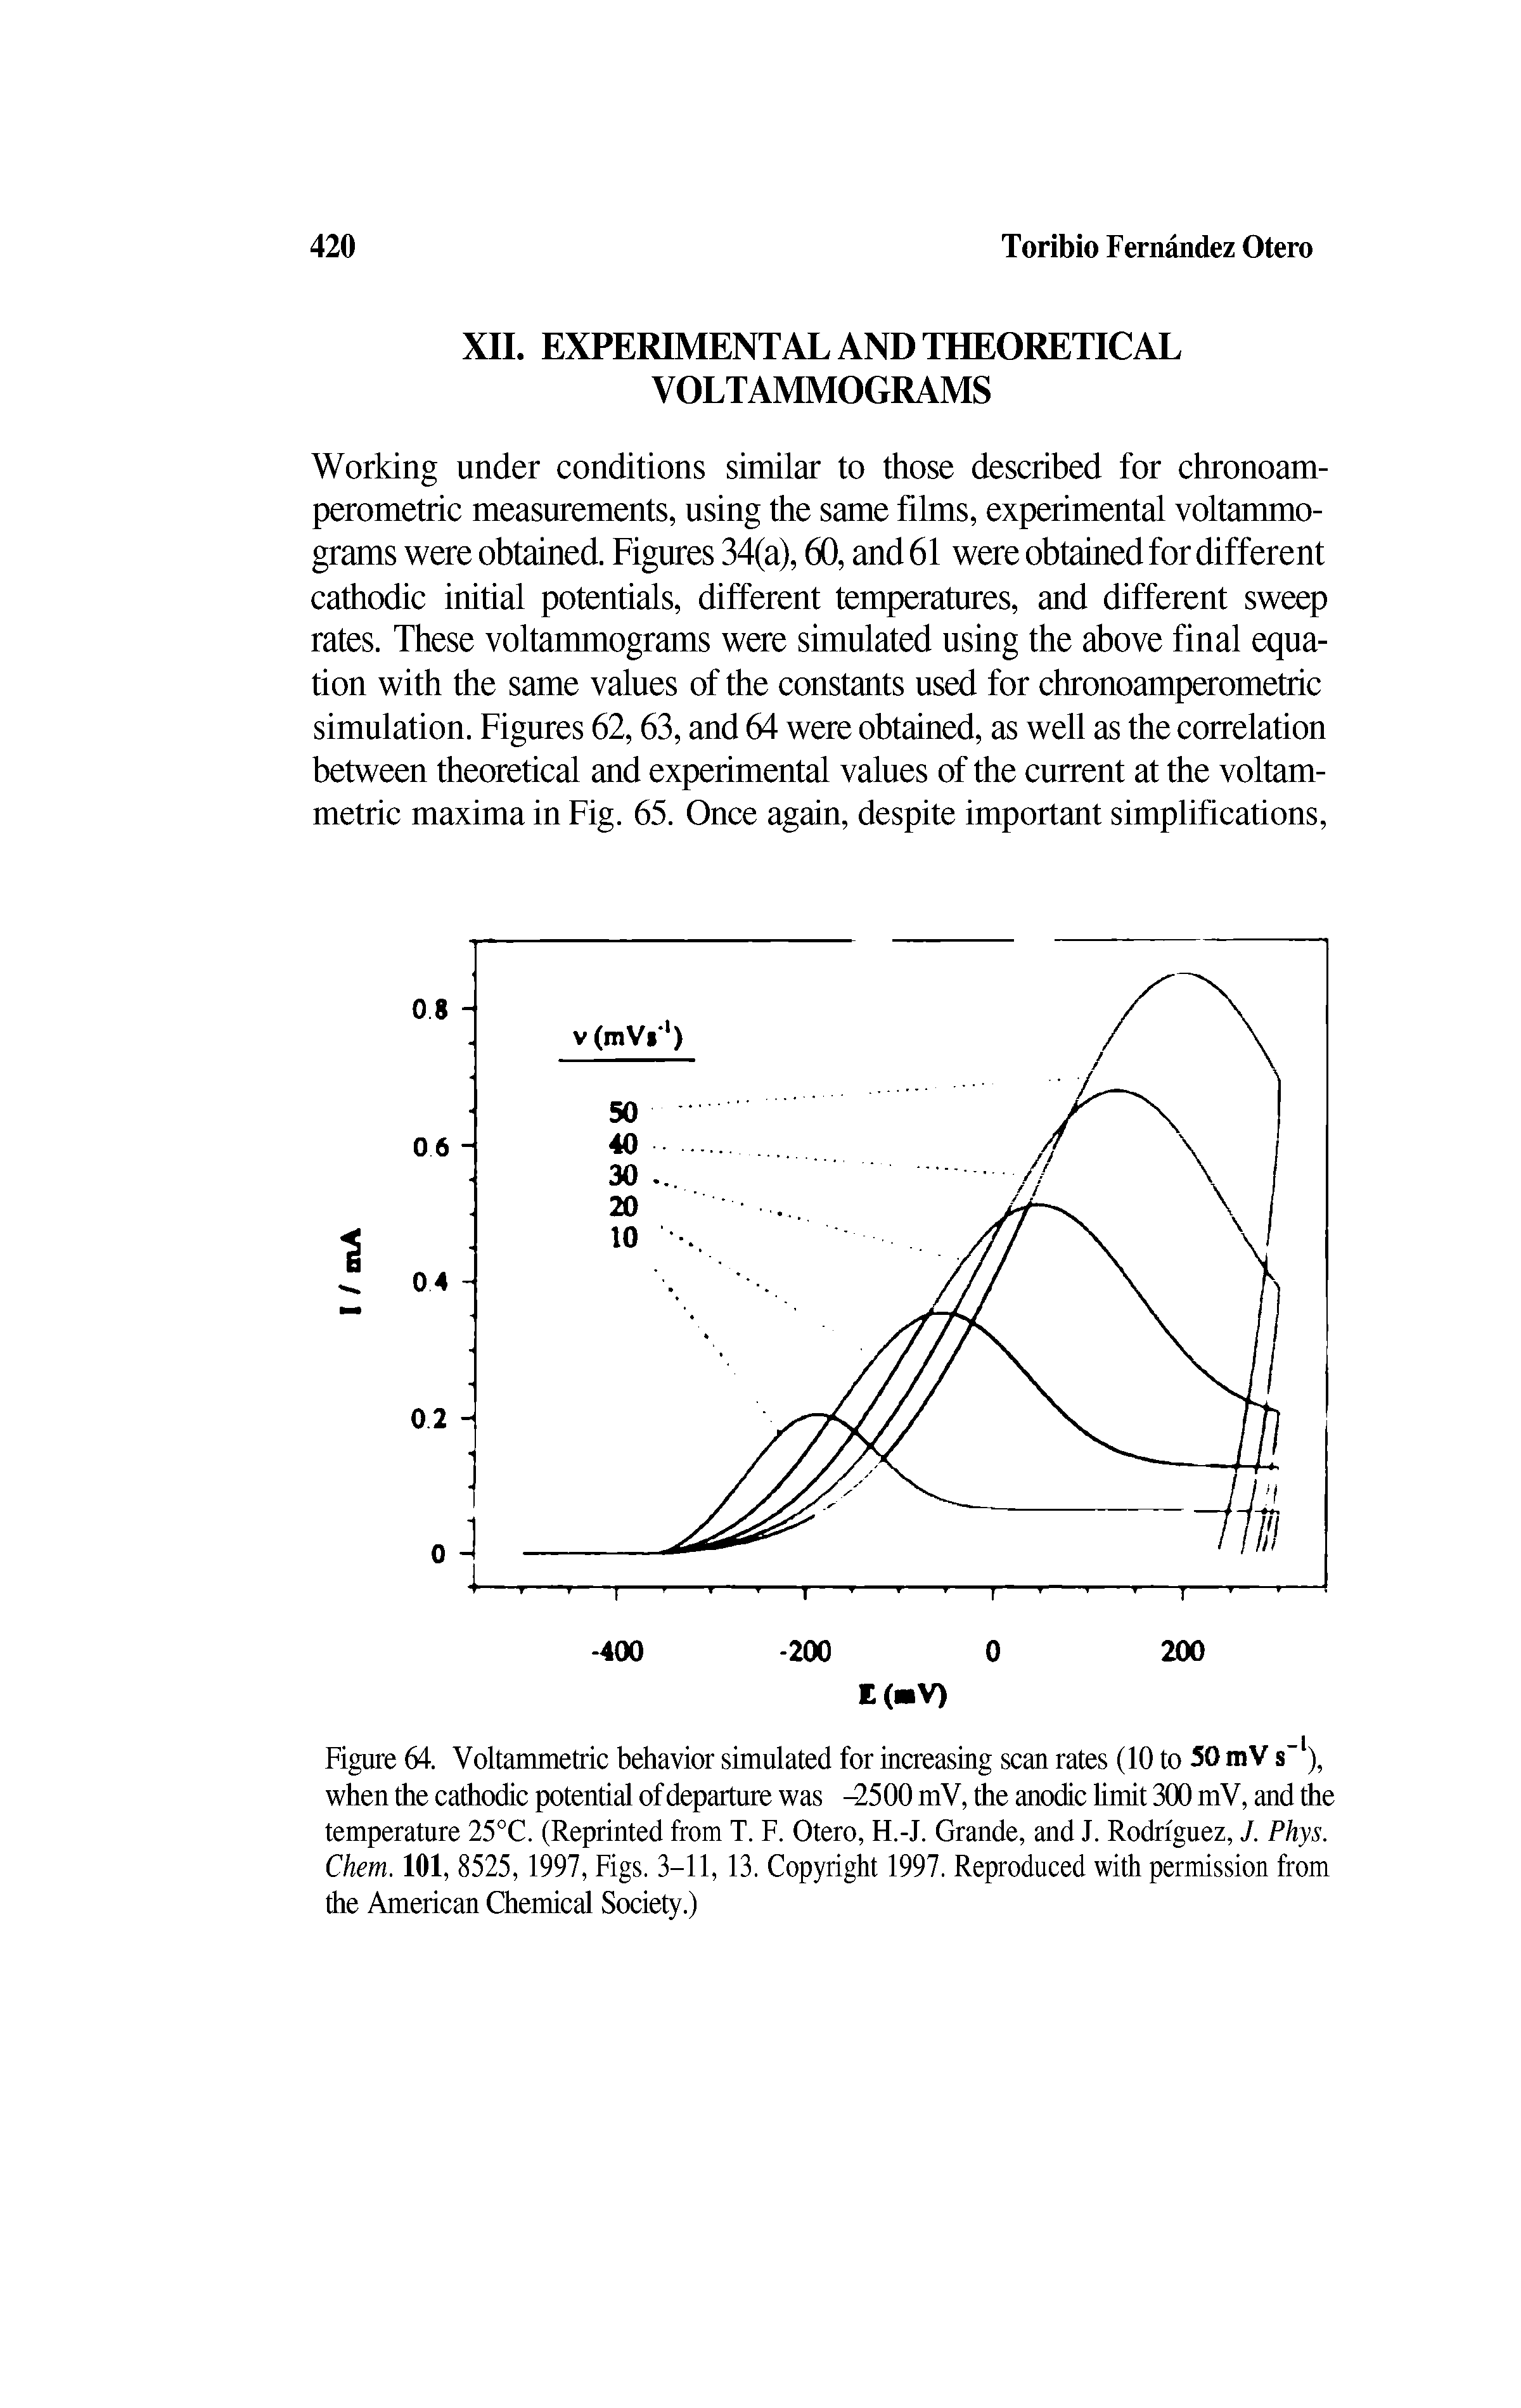 Figure 64. Voltammetric behavior simulated for increasing scan rates (10 to 50 mV s-1), when the cathodic potential of departure was -2500 mV, the anodic limit 300 mV, and the temperature 25°C. (Reprinted from T. F. Otero, H.-J. Grande, and J. Rodriguez, J. Phys. Chem. 101, 8525,1997, Figs. 3-11, 13. Copyright 1997. Reproduced with permission from the American Chemical Society.)...